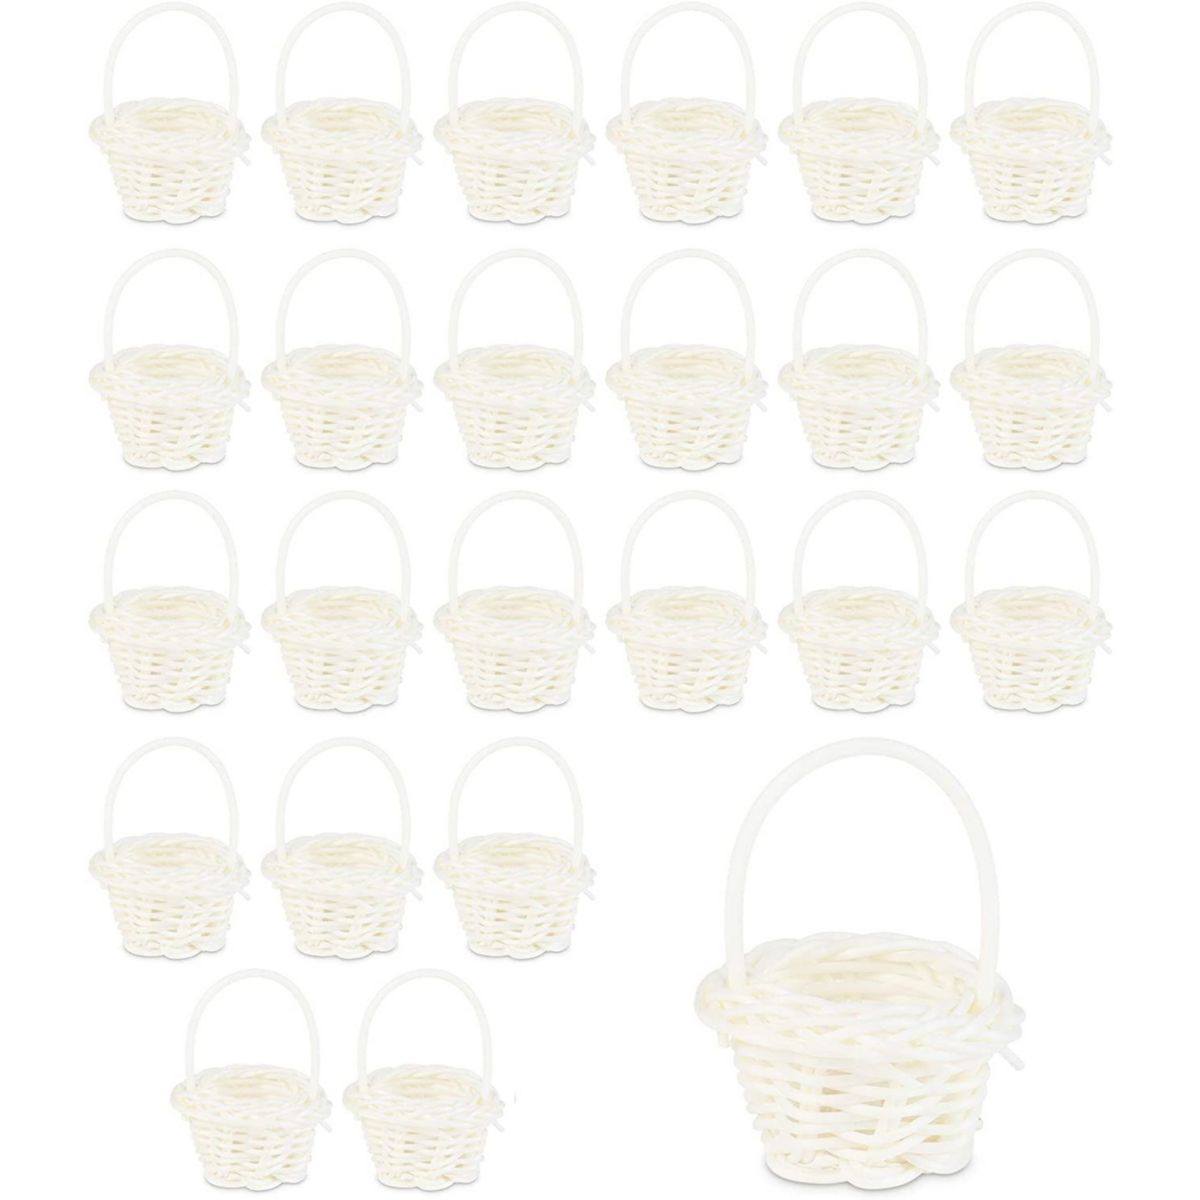 Juvale White Mini Woven Baskets with Handles (1.75 x 2.5 in, 24 Pack) Juvale